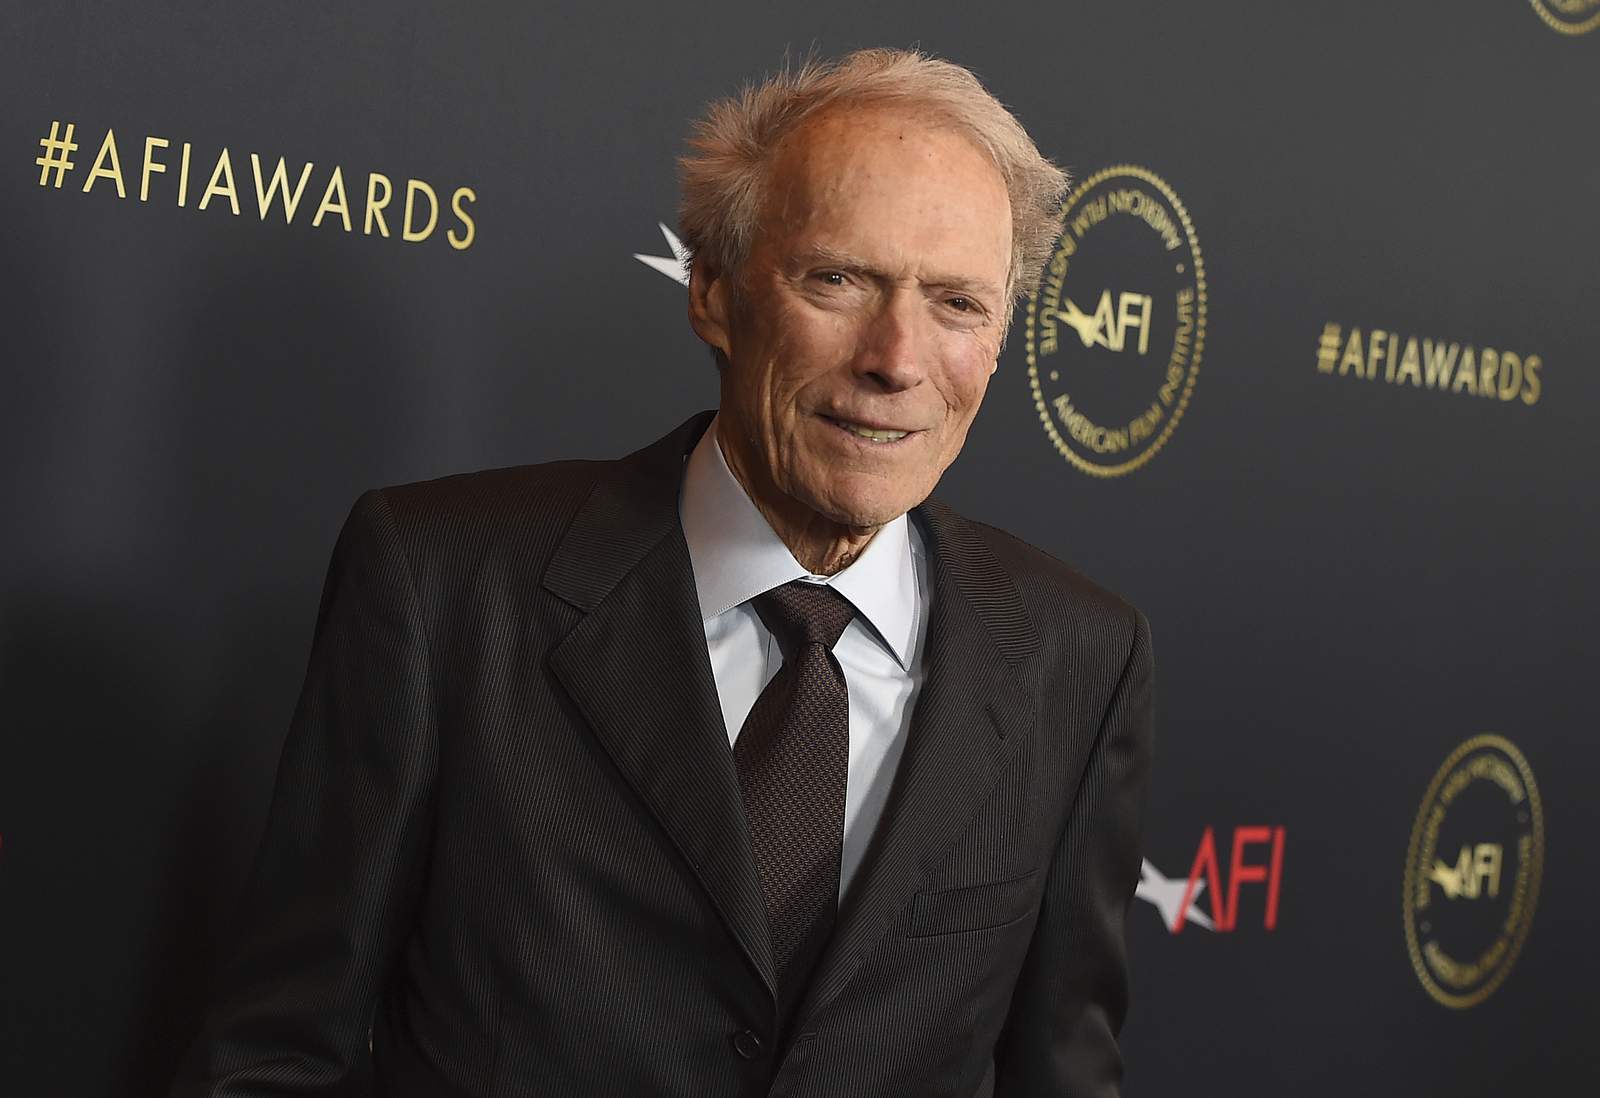 Clint Eastwood sues CBD sellers over use of his name, image